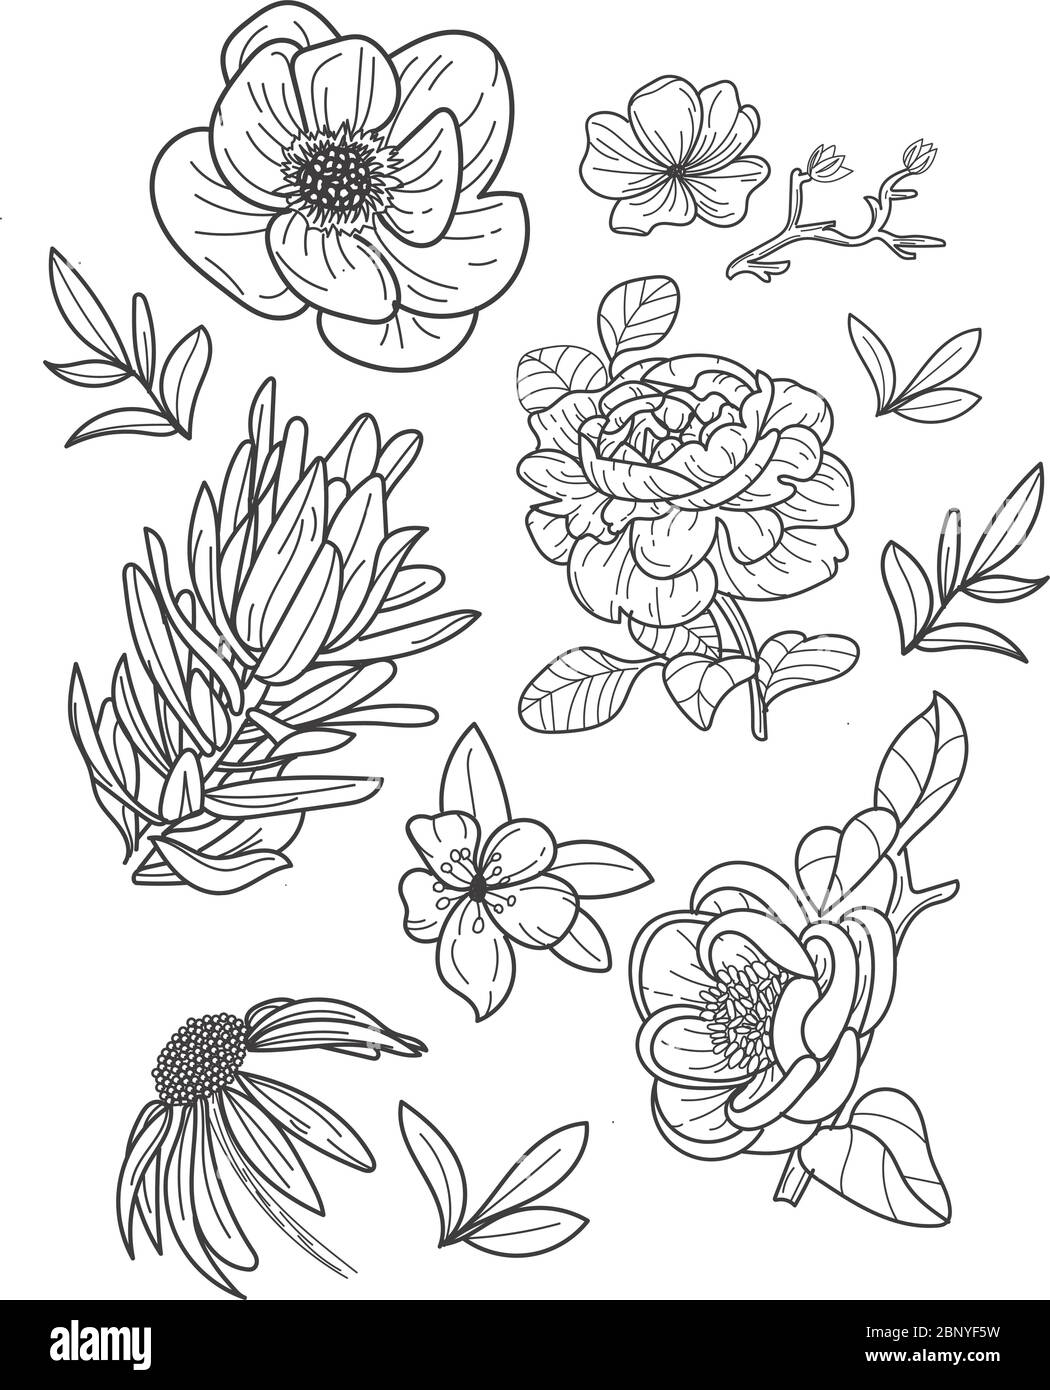 Boho Flowers and Foliage - Set of Blooming Sunflowers, Peonies, and Leaves Stock Vector